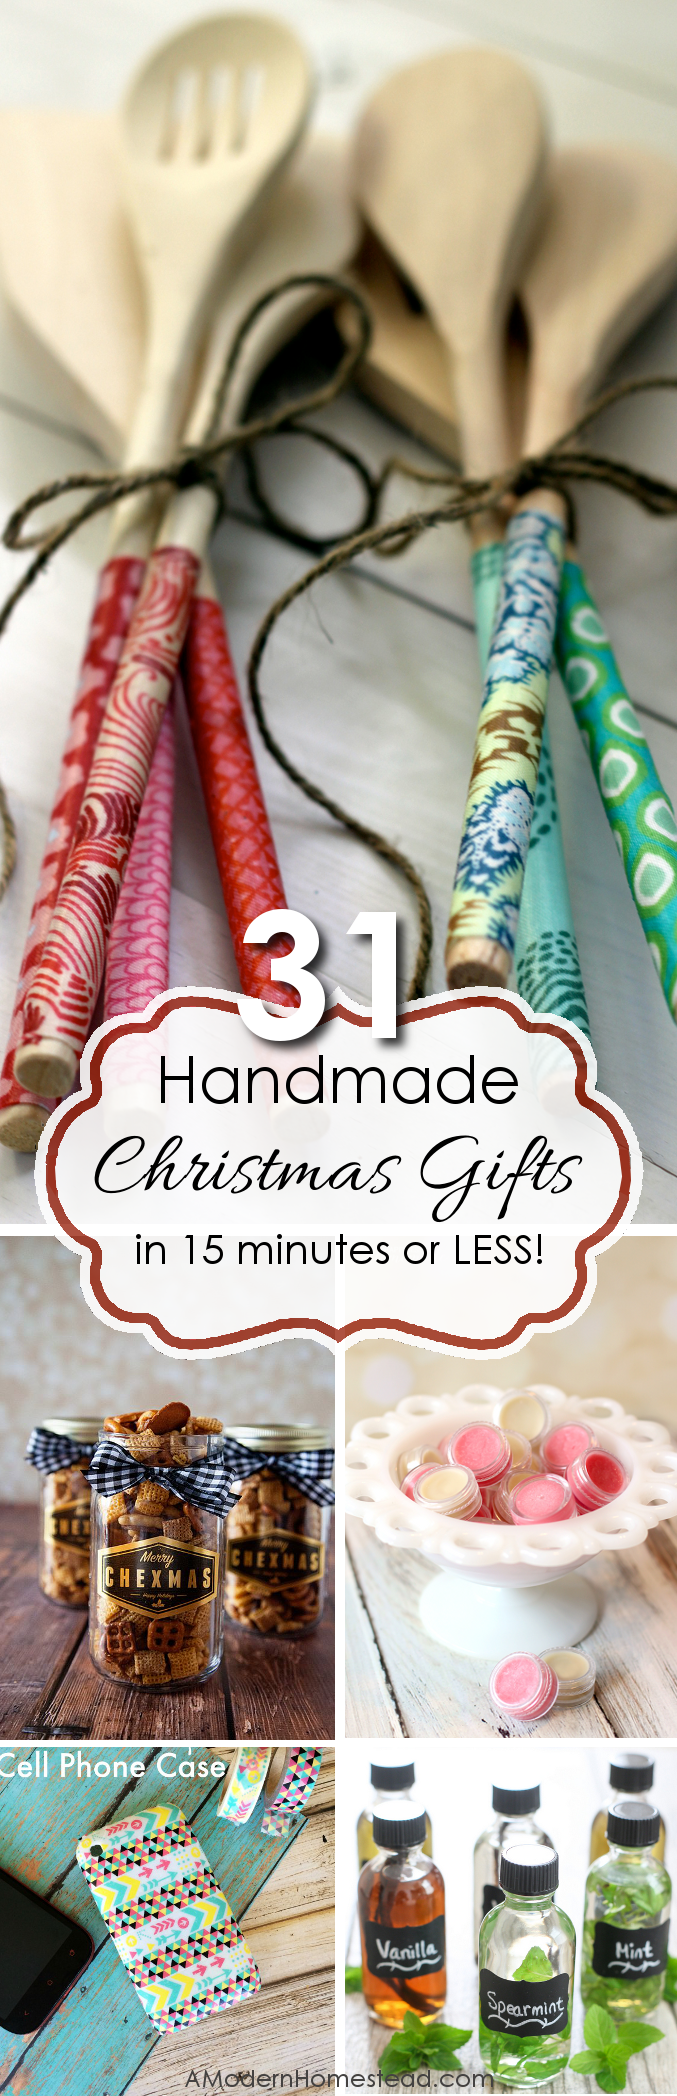 Christmas Is Coming : Handmade gifts are a wonderful way to show you care! Here are 31 handmade gifts you can make in 15 minutes